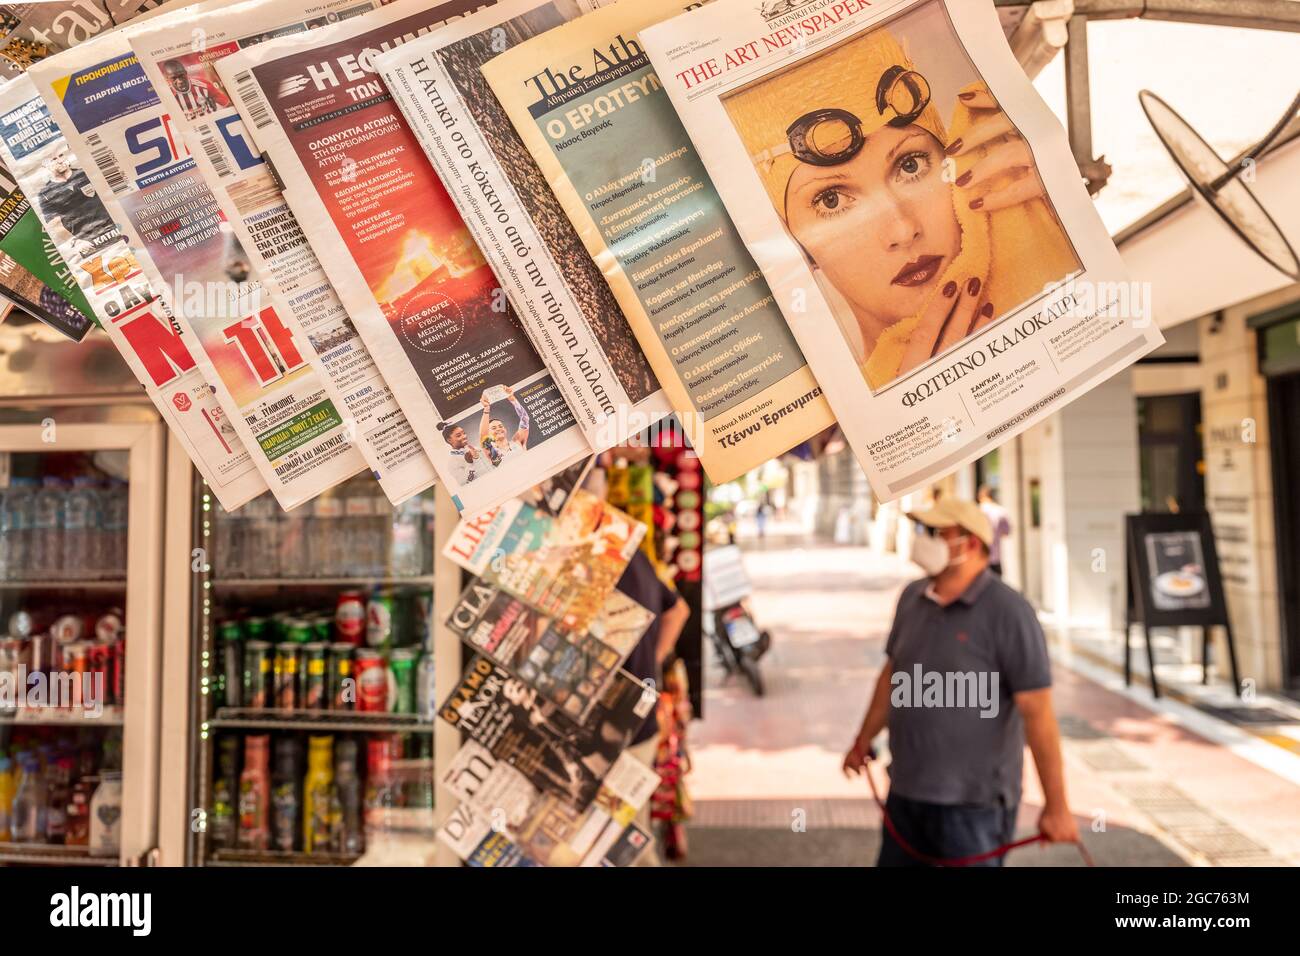 Athens, August 4th 2021: Newspapers on sale at a kiosk in Athens Stock Photo